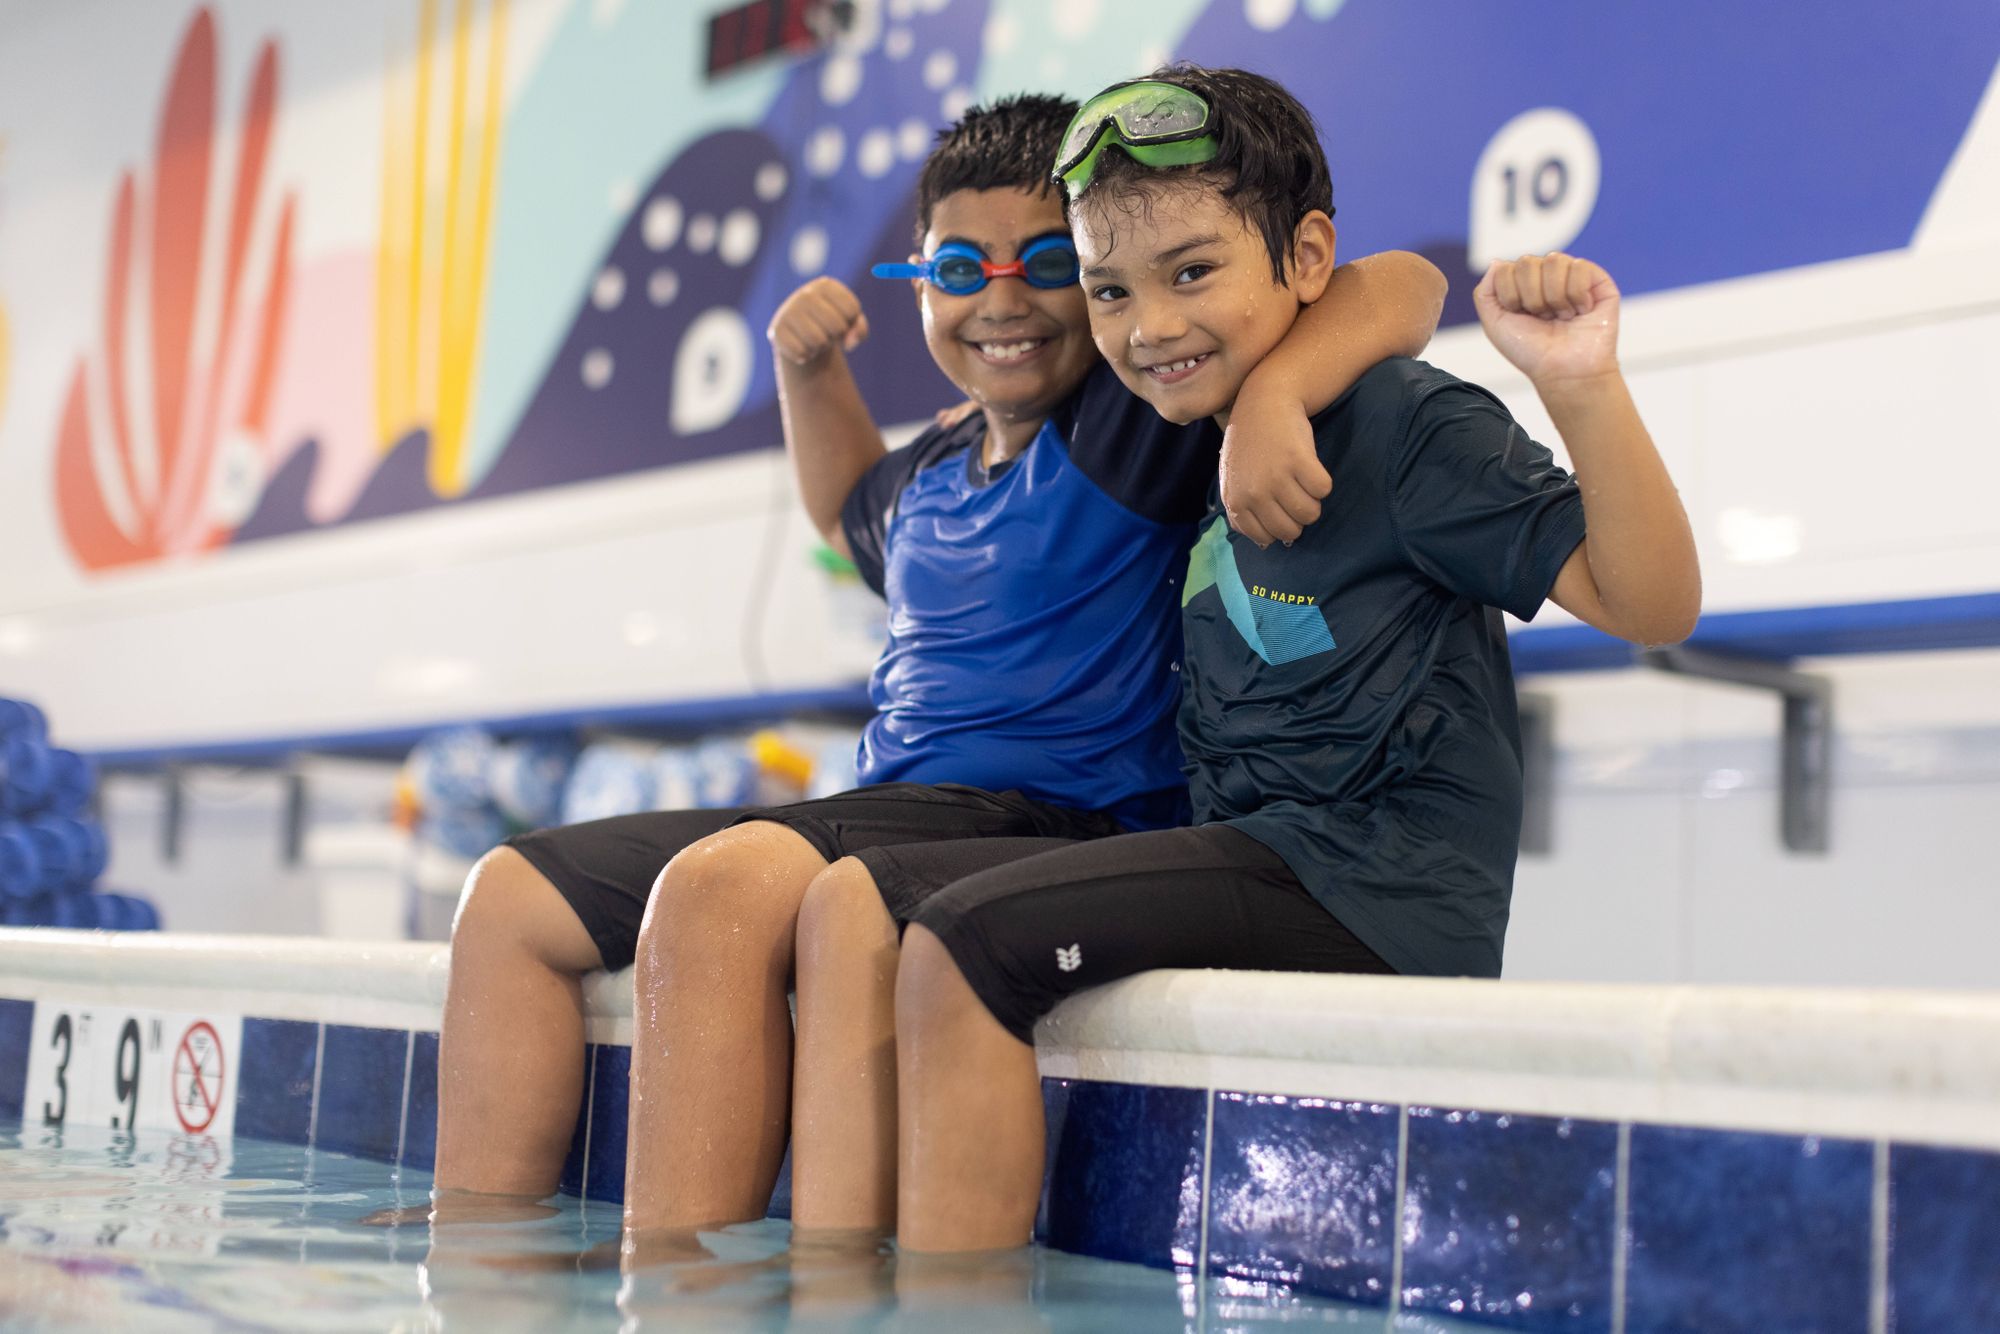 Year-round swim lessons are key in making your child feel confident and safe for summer activities!